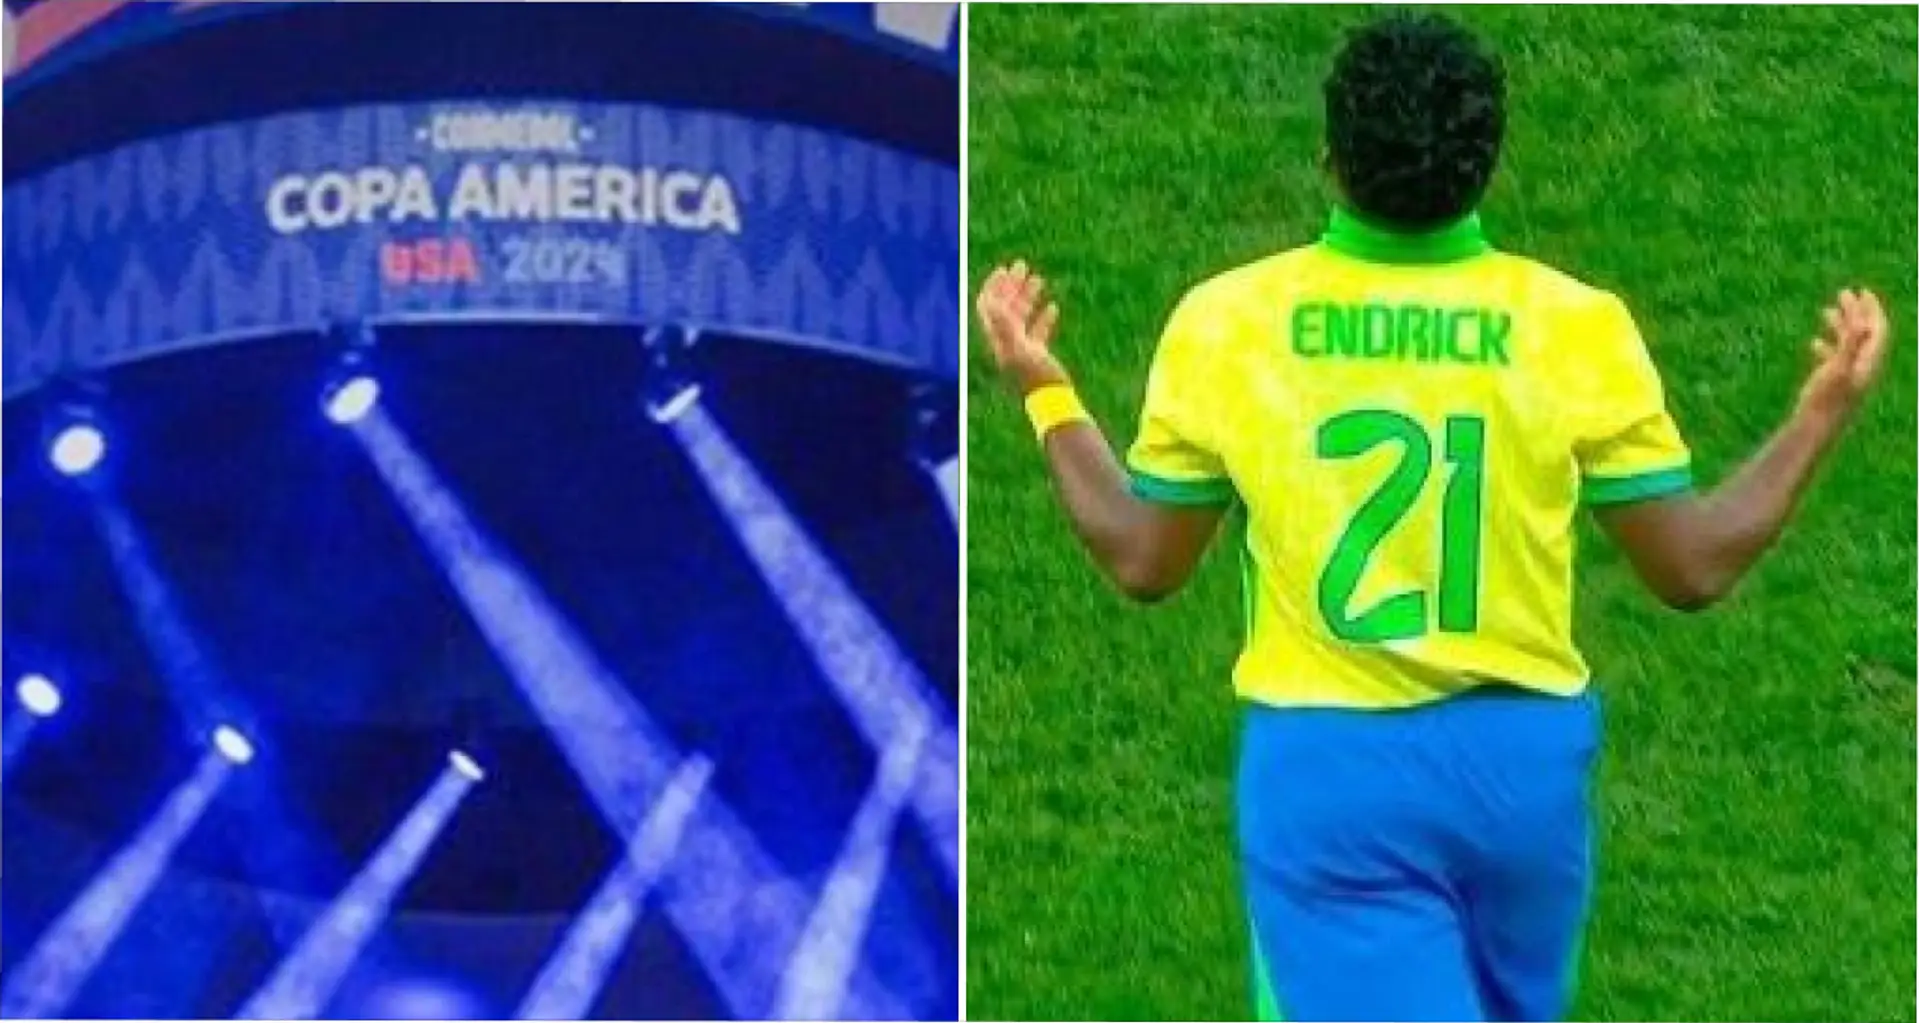 Endrick heading to Copa America and 2 more under-radar stories of the day